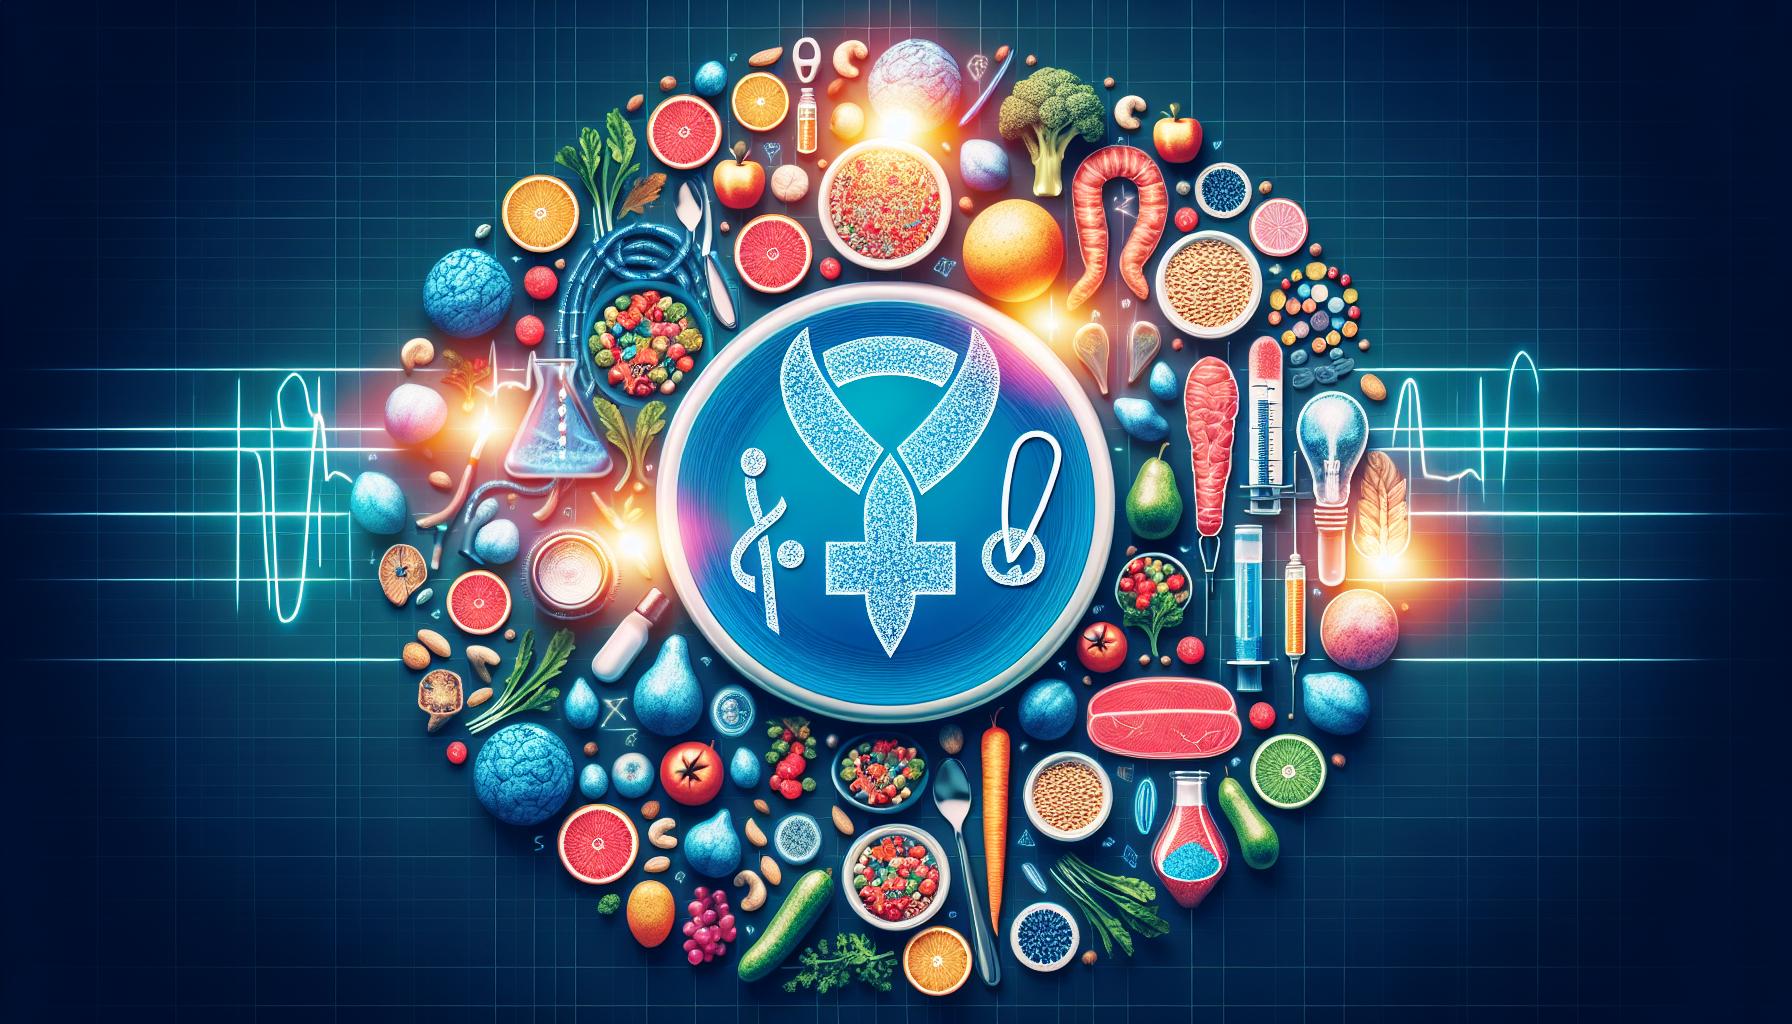 Optimal Diet for Prostate Cancer: Mayo Clinic Recommendations